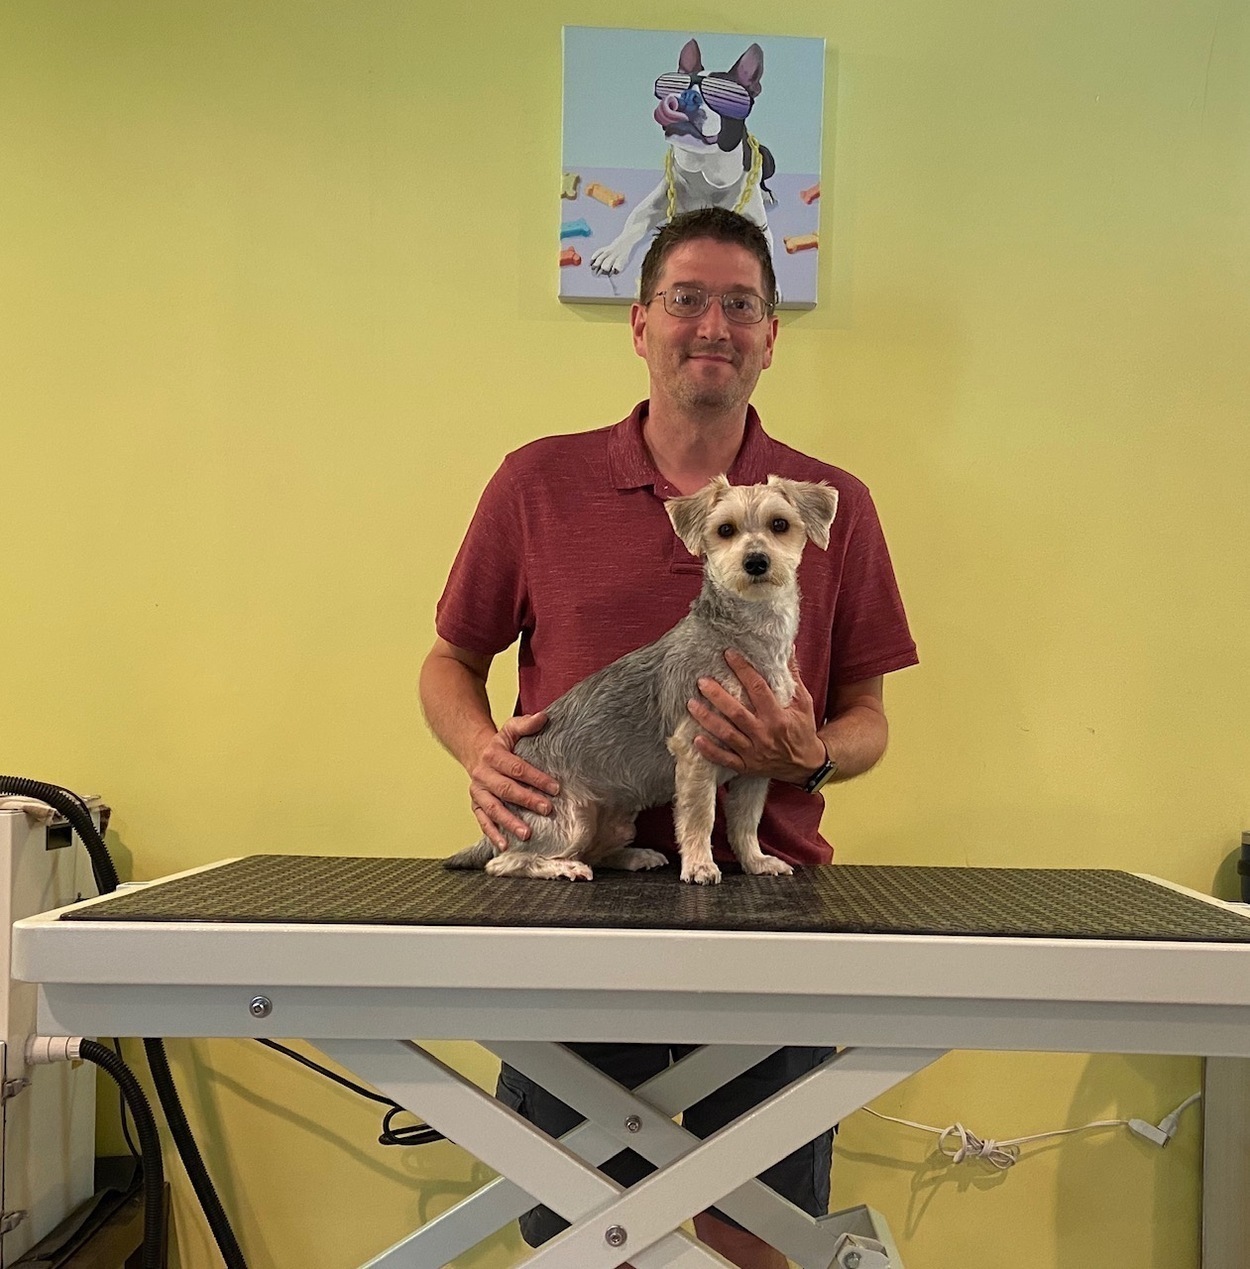 Rodney, Owner & Groomer at Paws Up Pet Grooming in Normal, IL